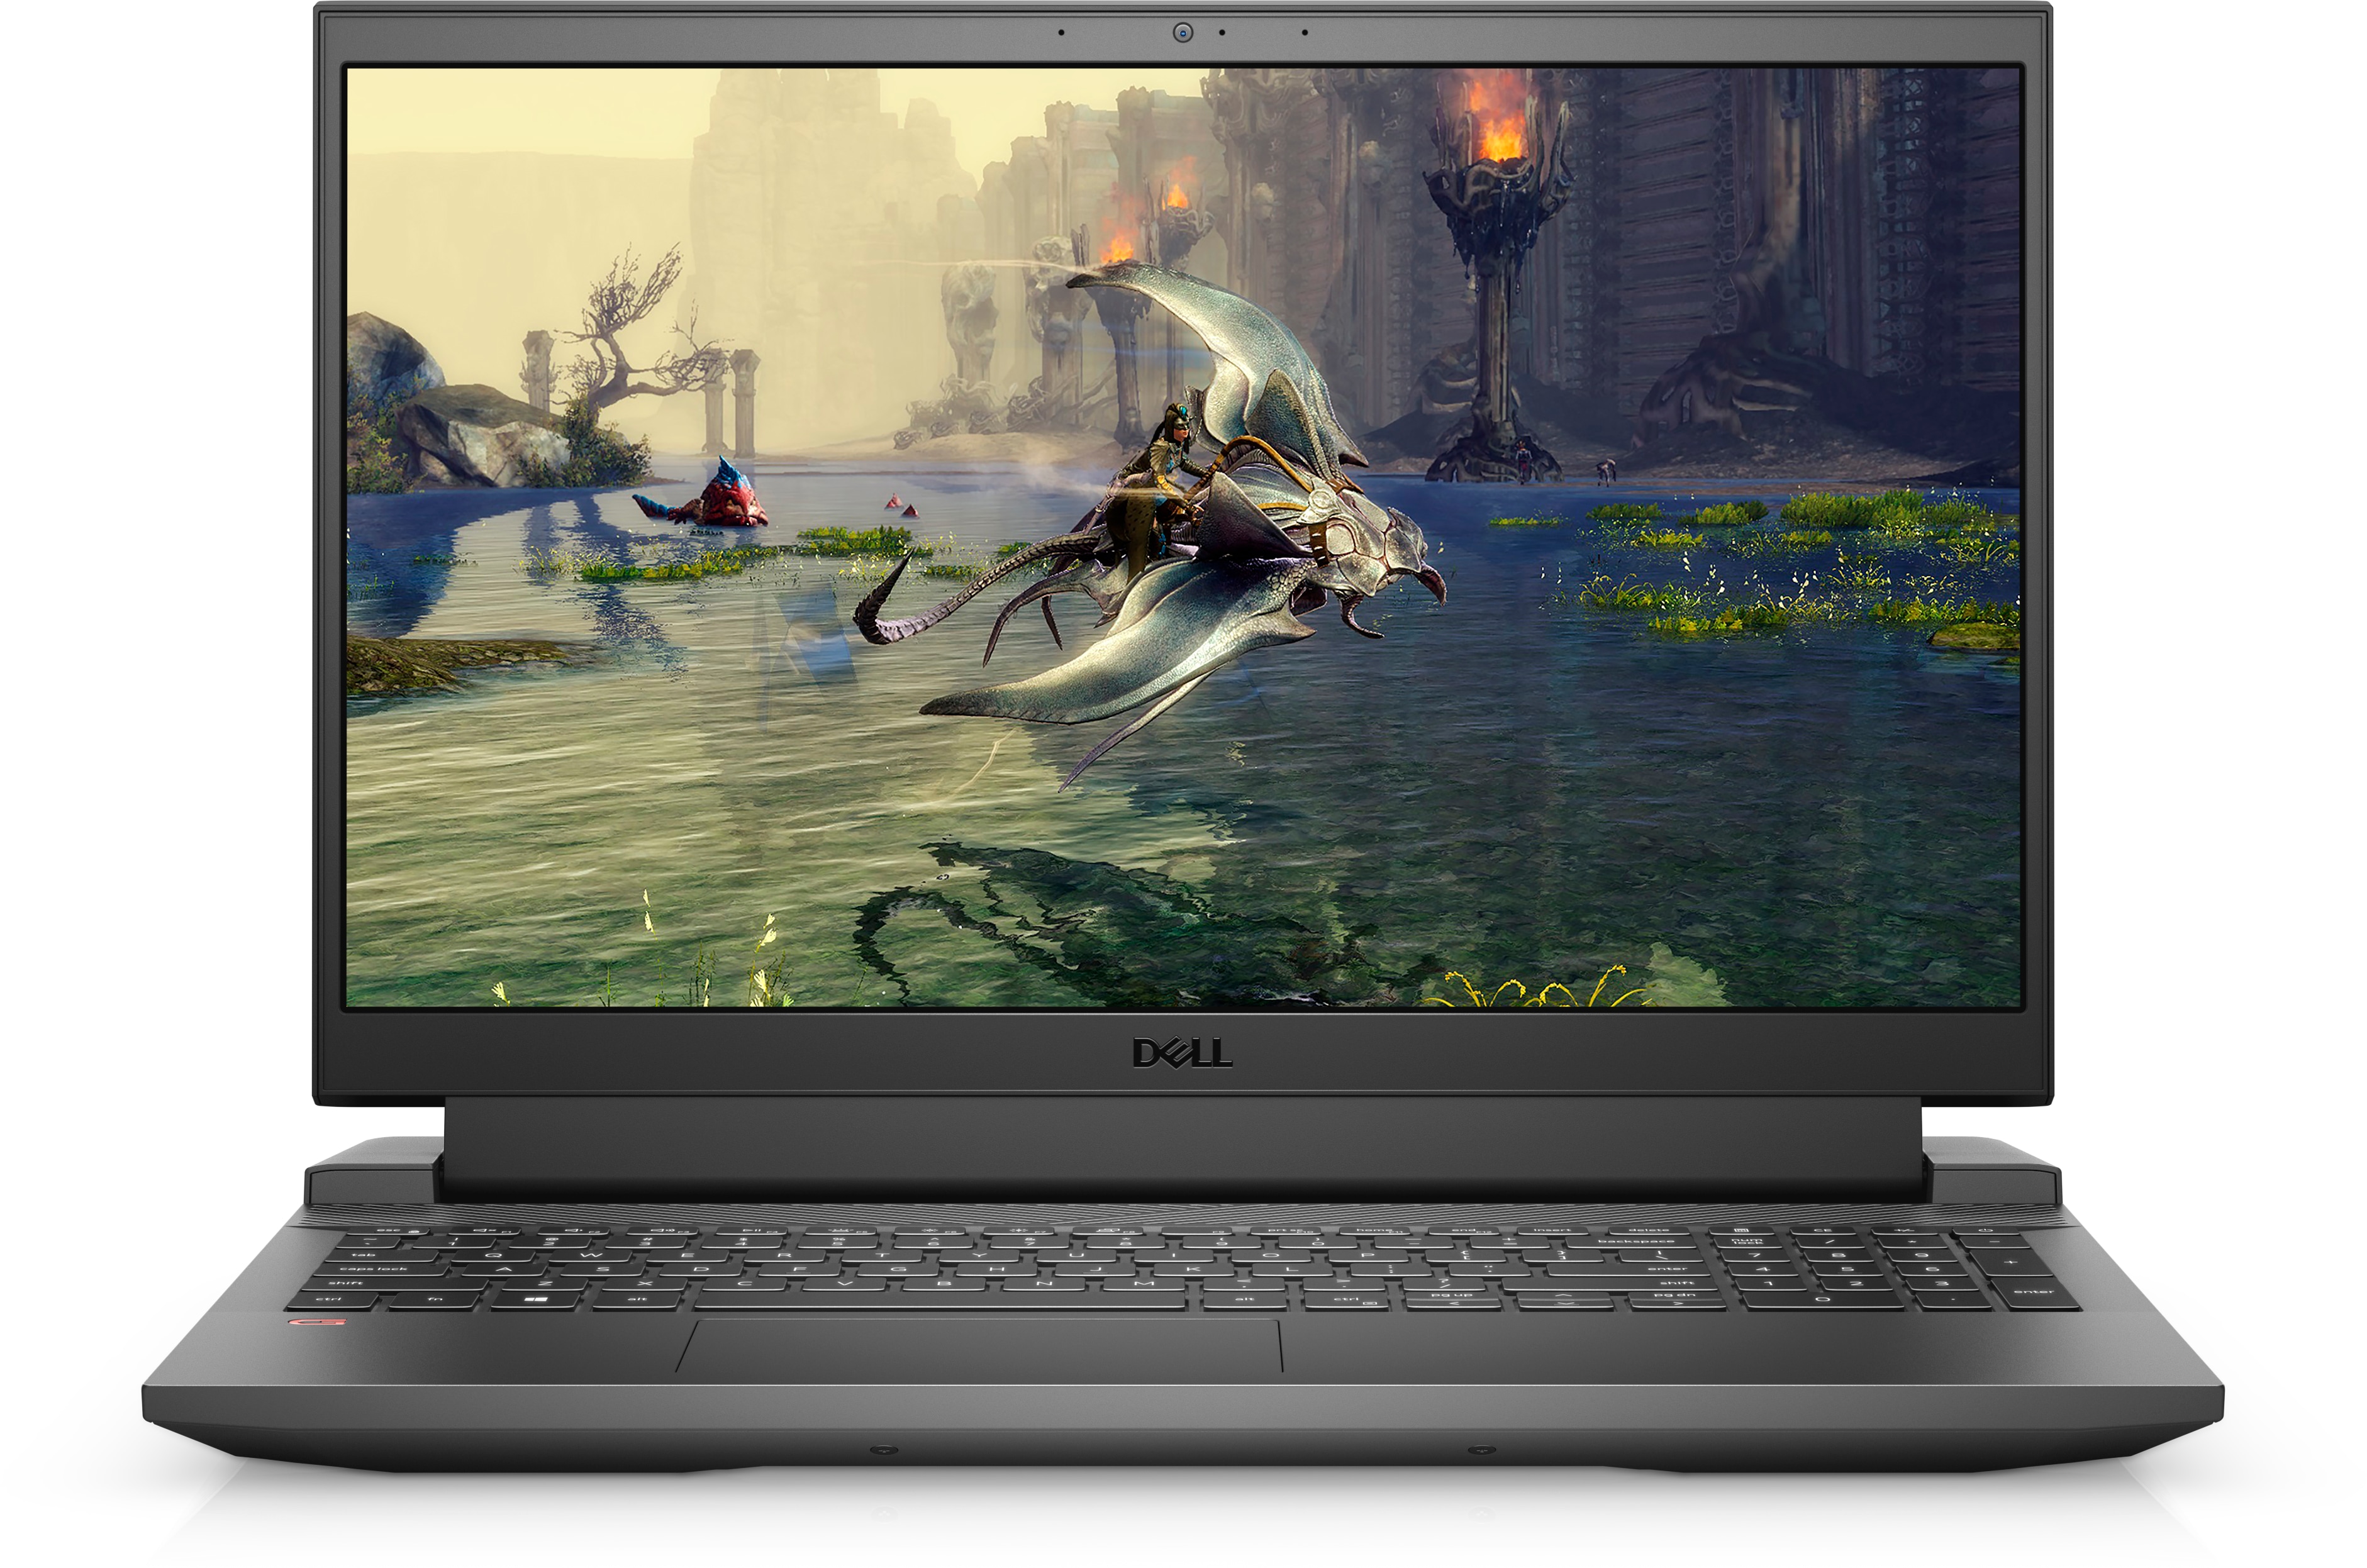 G-Series G15 5000 Series Non-Touch Gaming Notebook